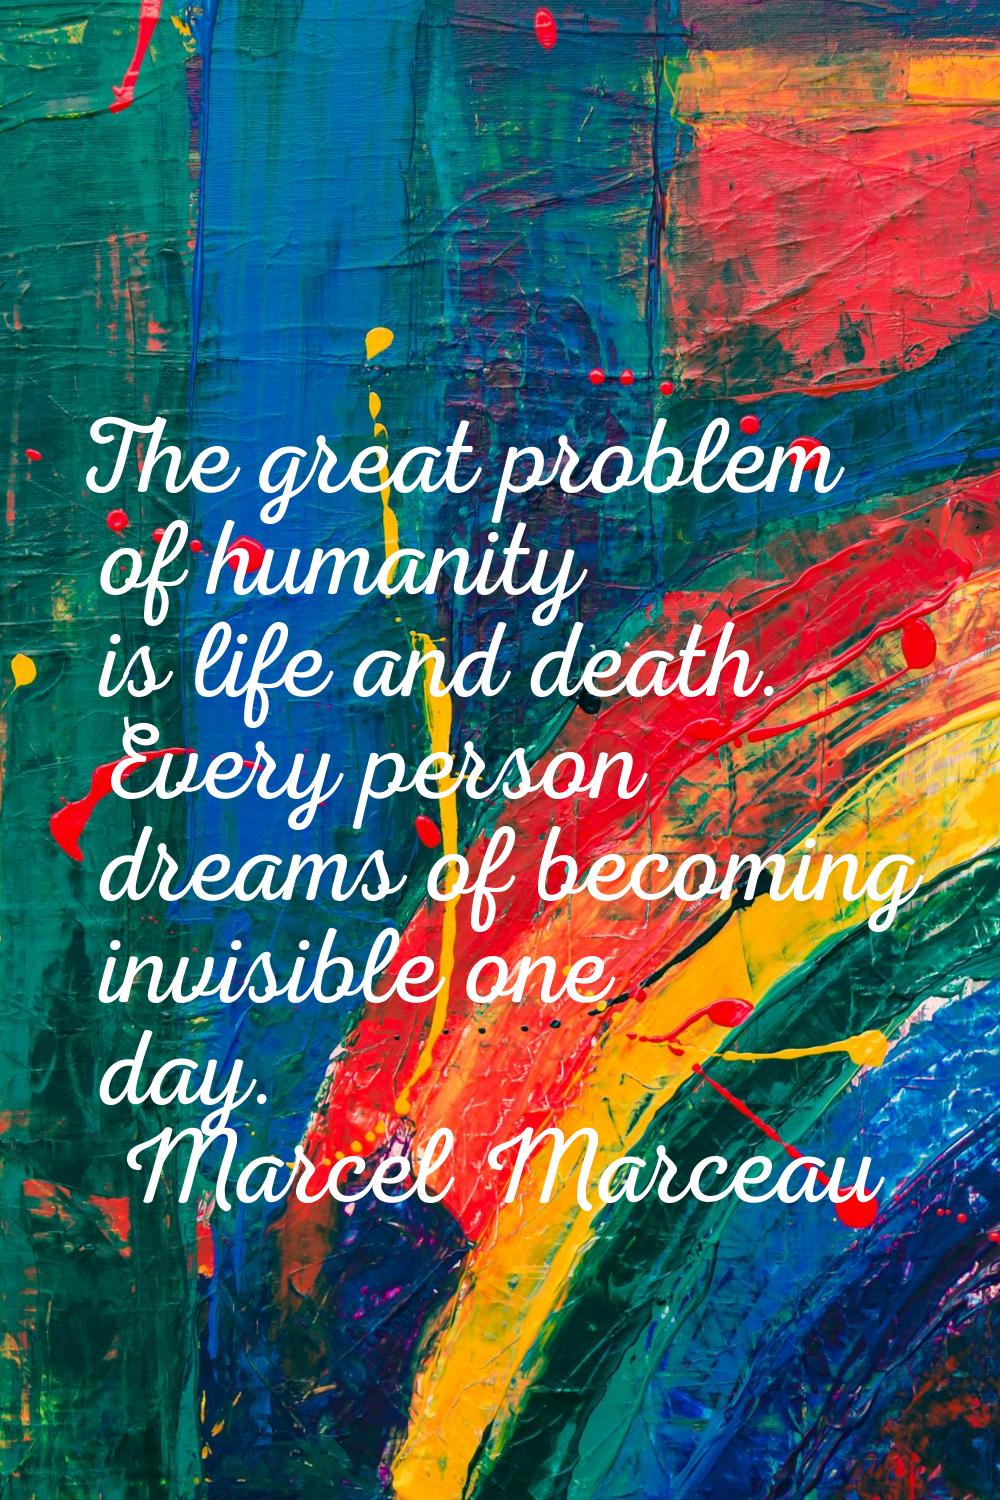 The great problem of humanity is life and death. Every person dreams of becoming invisible one day.